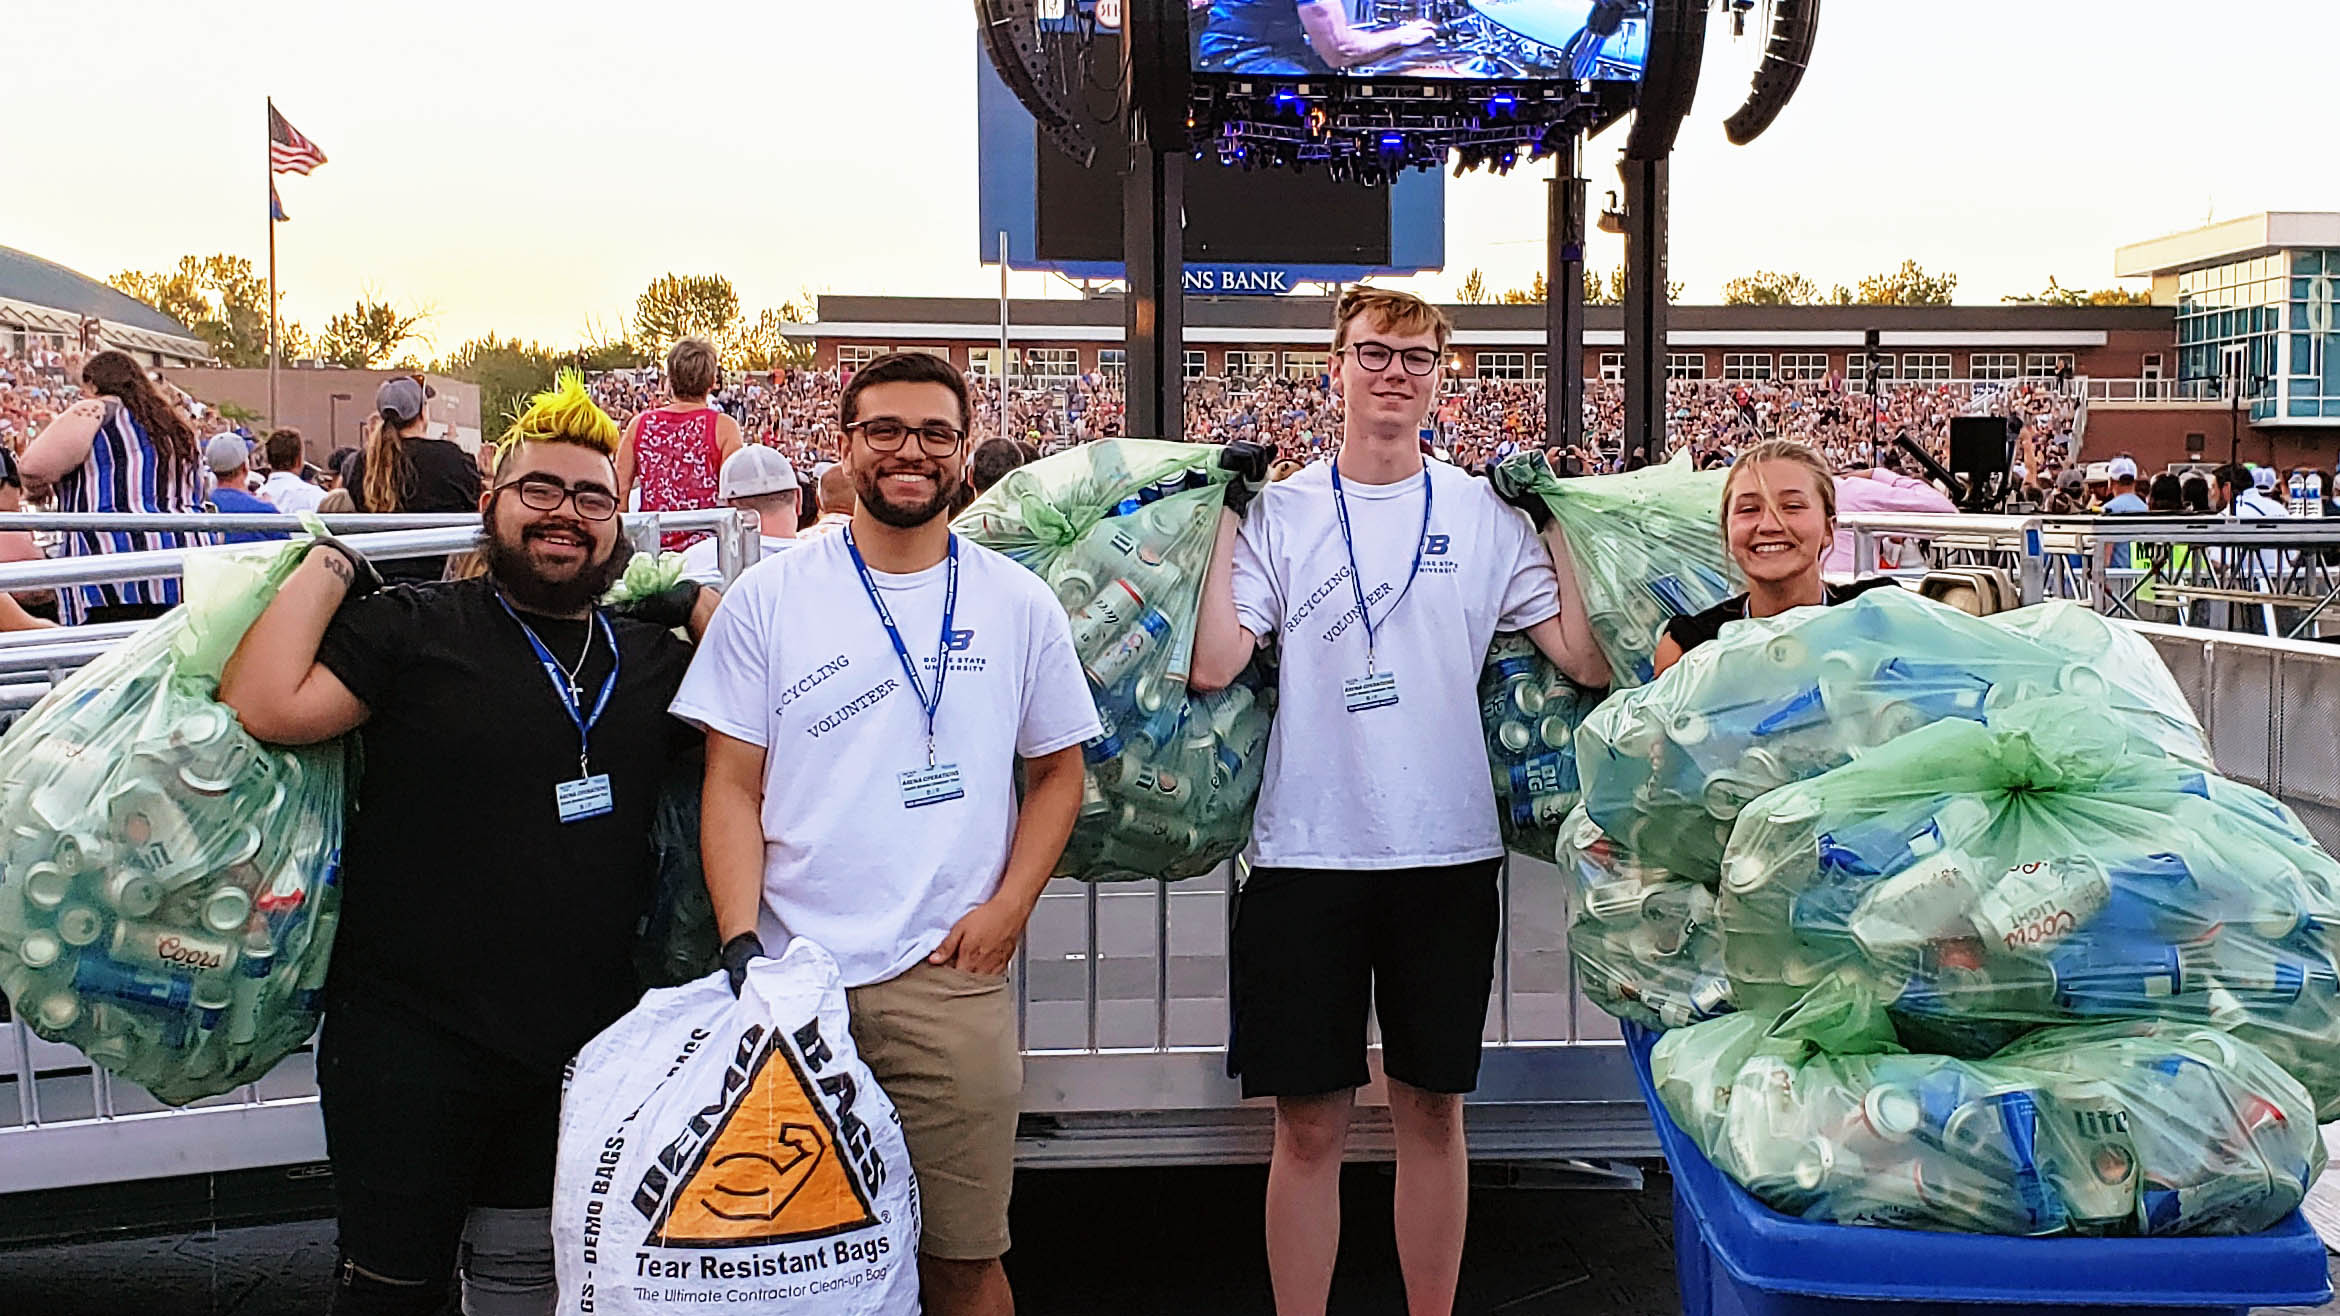 A group of students smiling and carrying large bags of cans to recycle